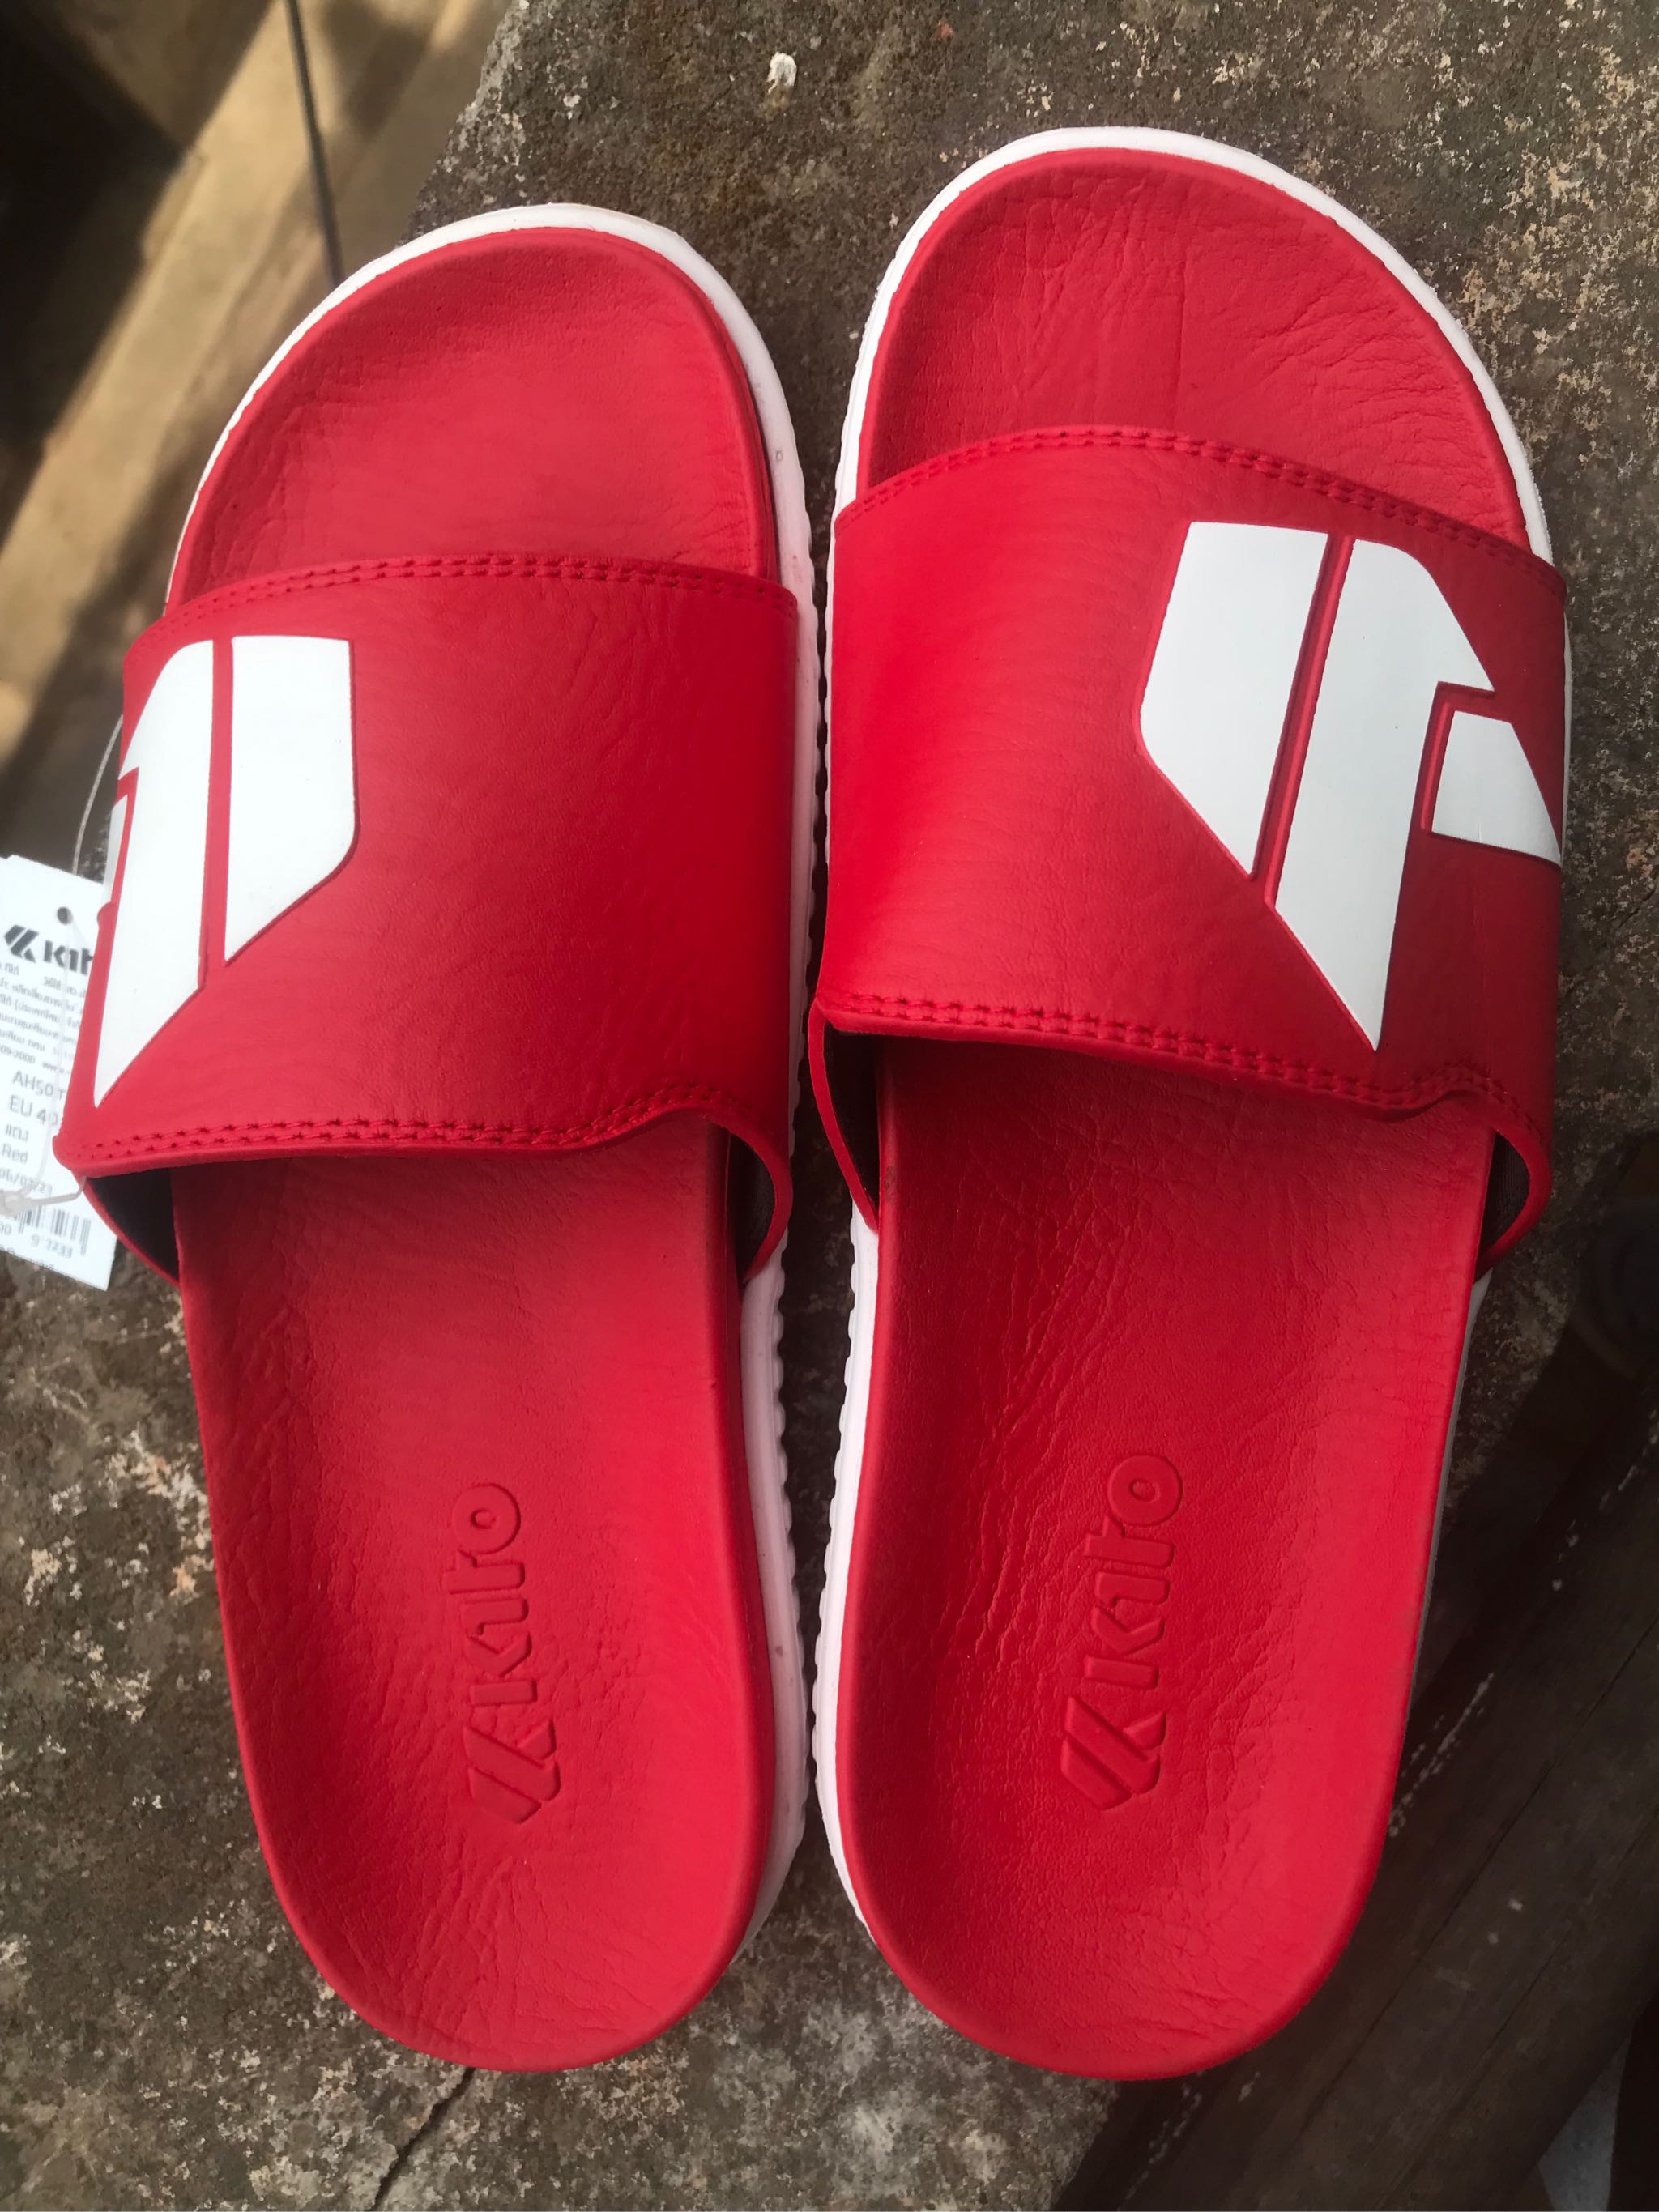 Red Kito Slippers - N6,500 [Promo Price] - Limited Offer - Light